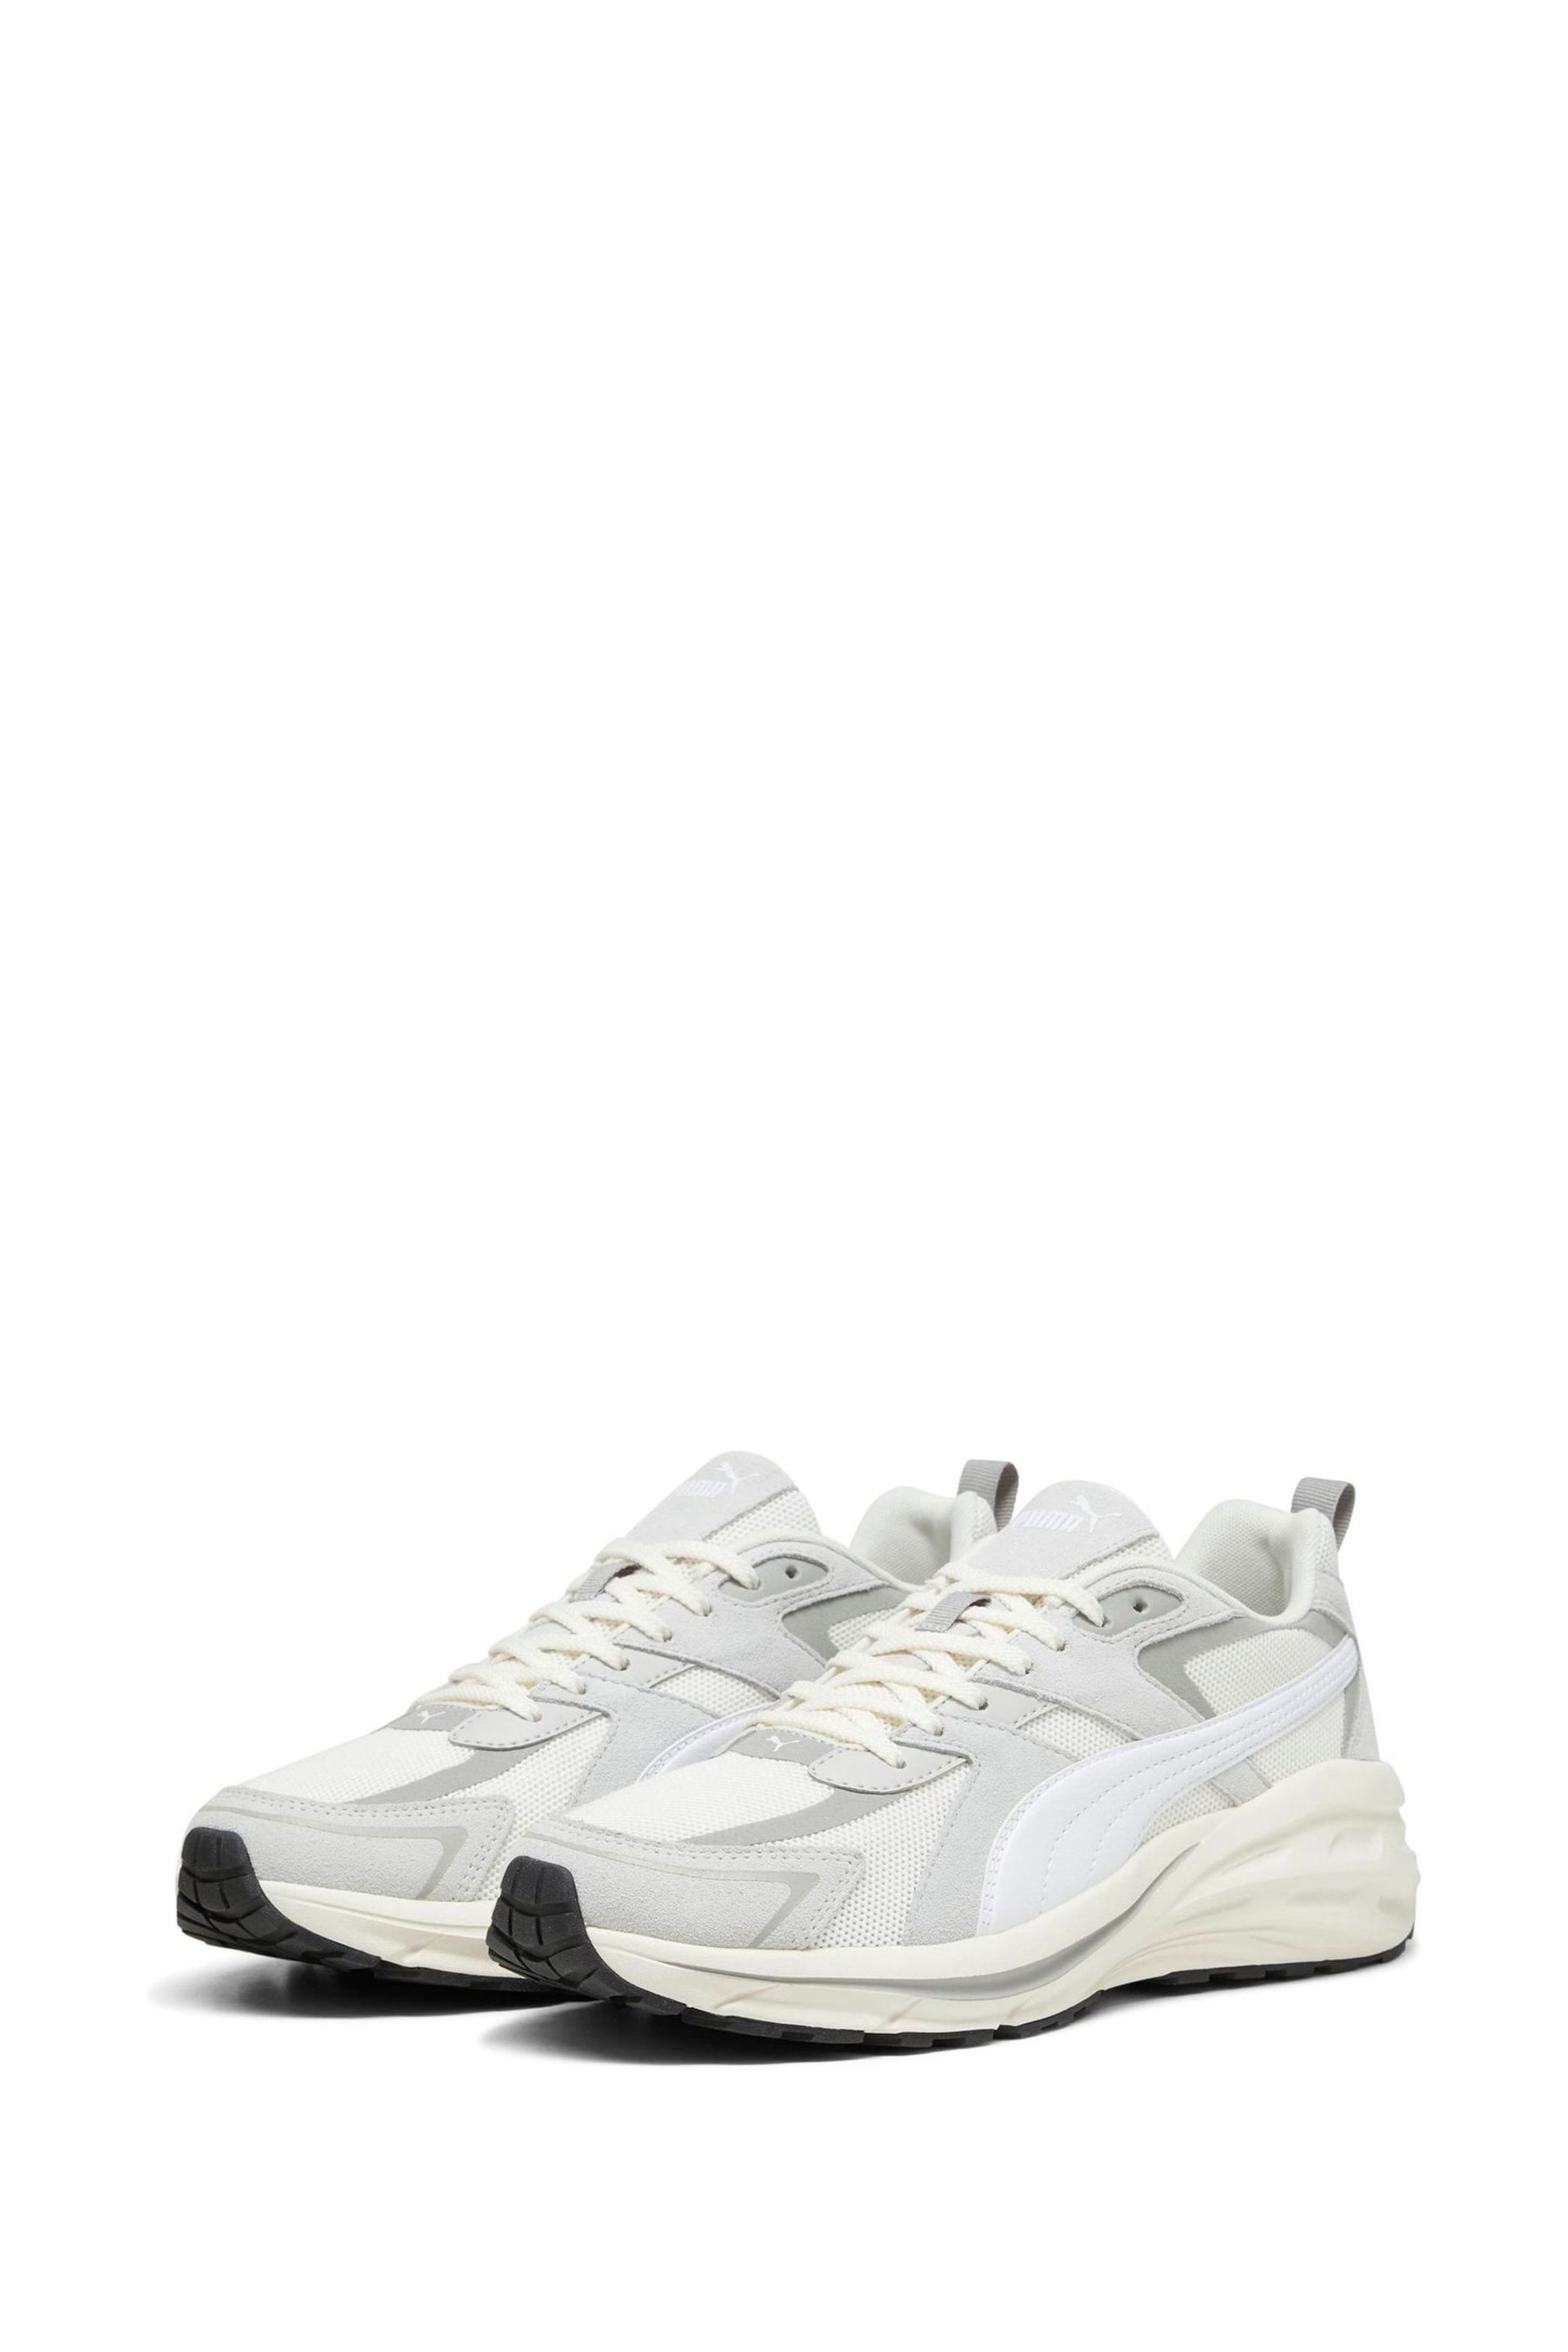 Puma White Mens Hypnotic LS Sneakers - Image 5 of 8